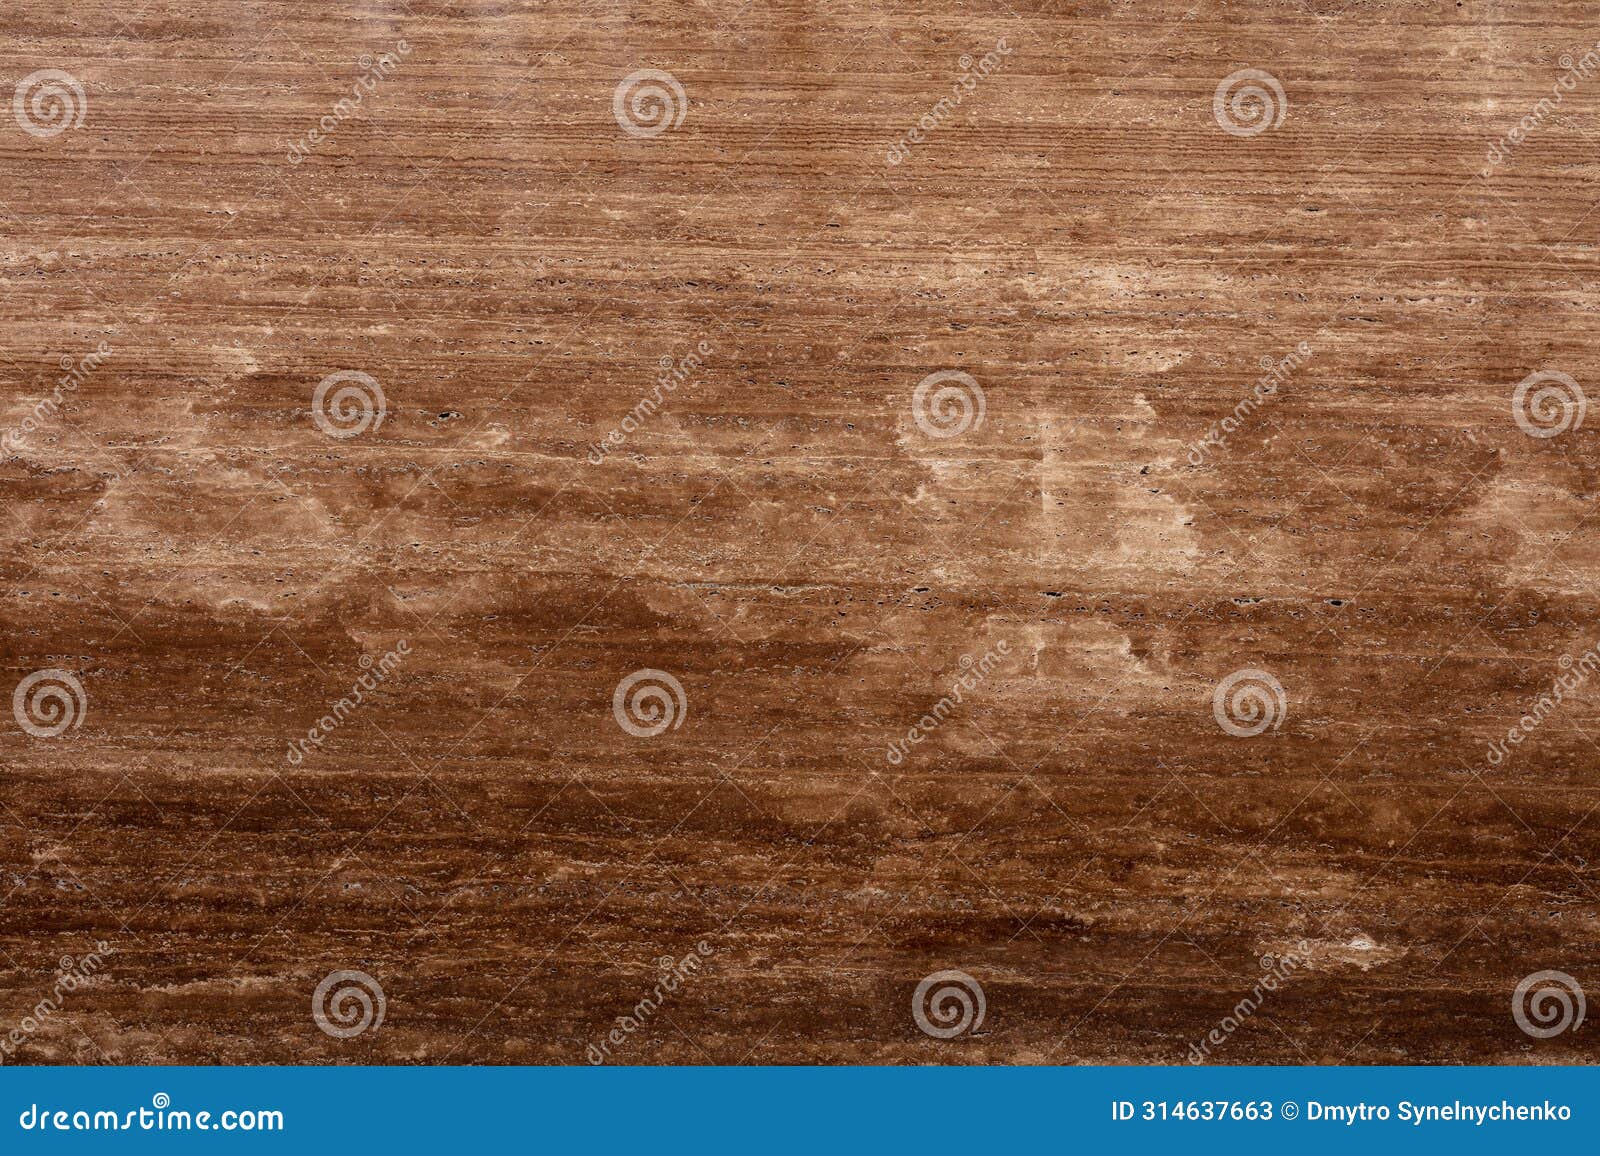 travertine noche background, texture in brown color for . slab photo.